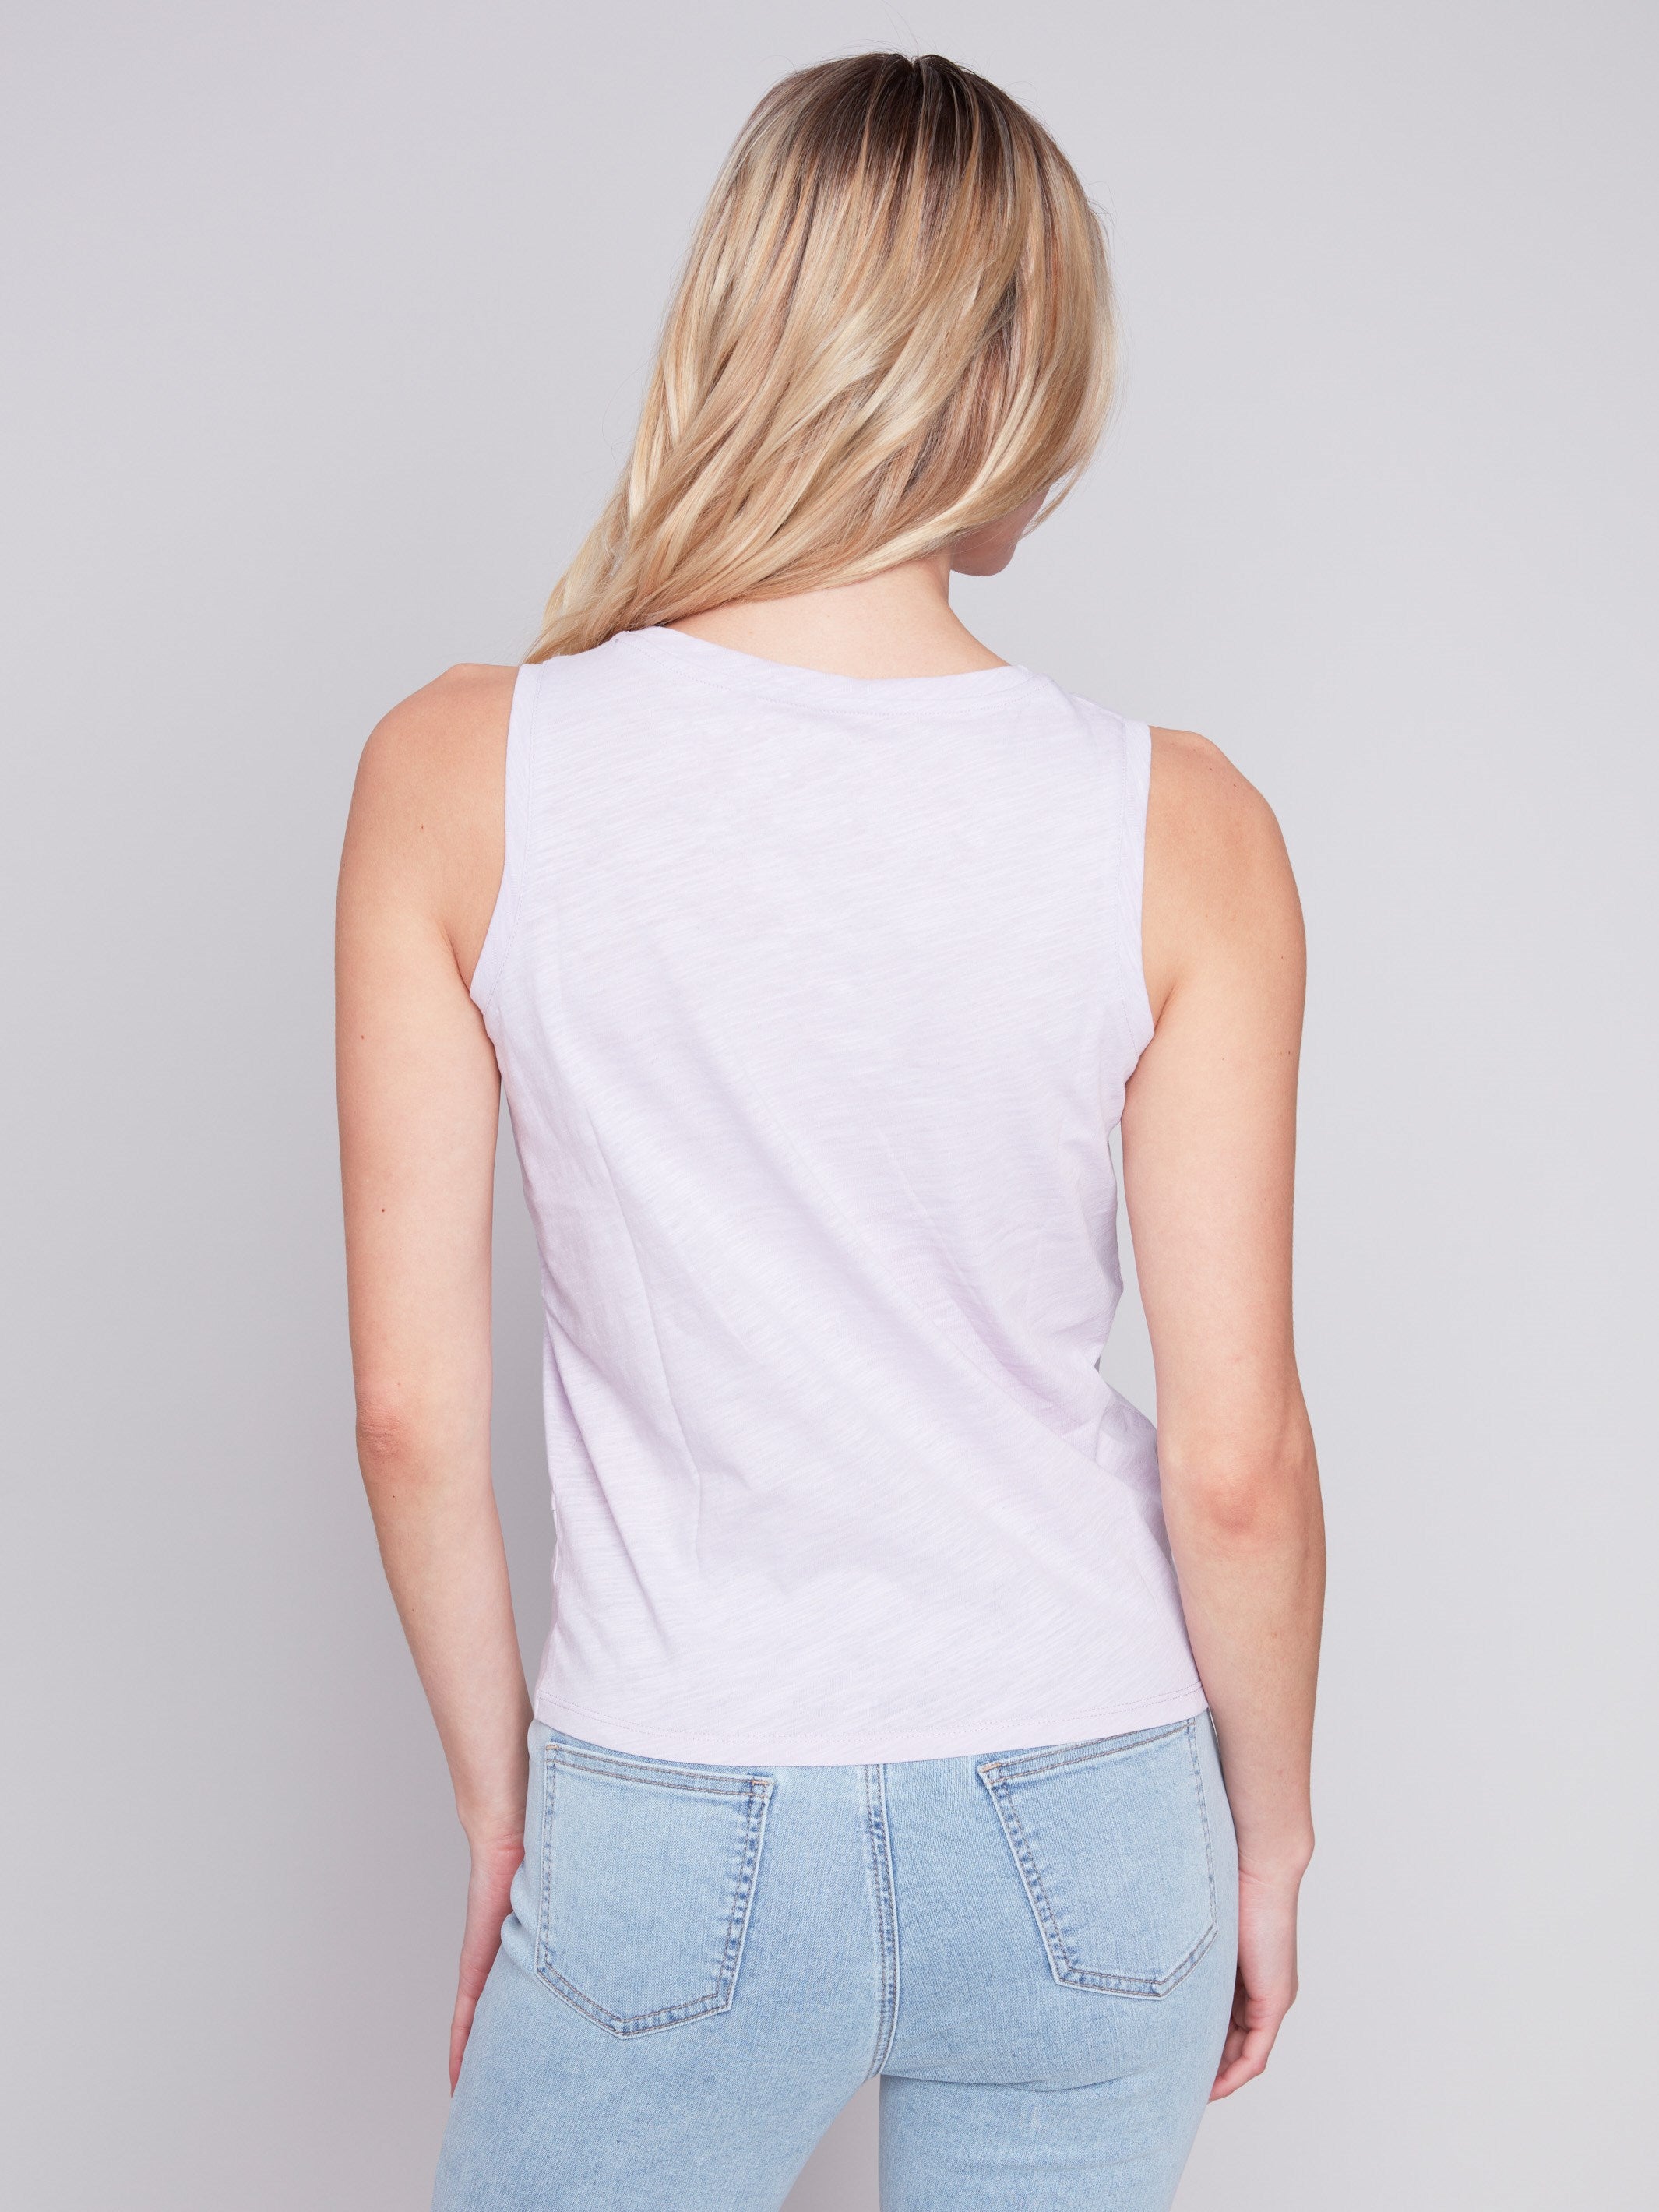 Charlie B Organic Cotton Tank Top With Knot Detail - Lavender - Image 2